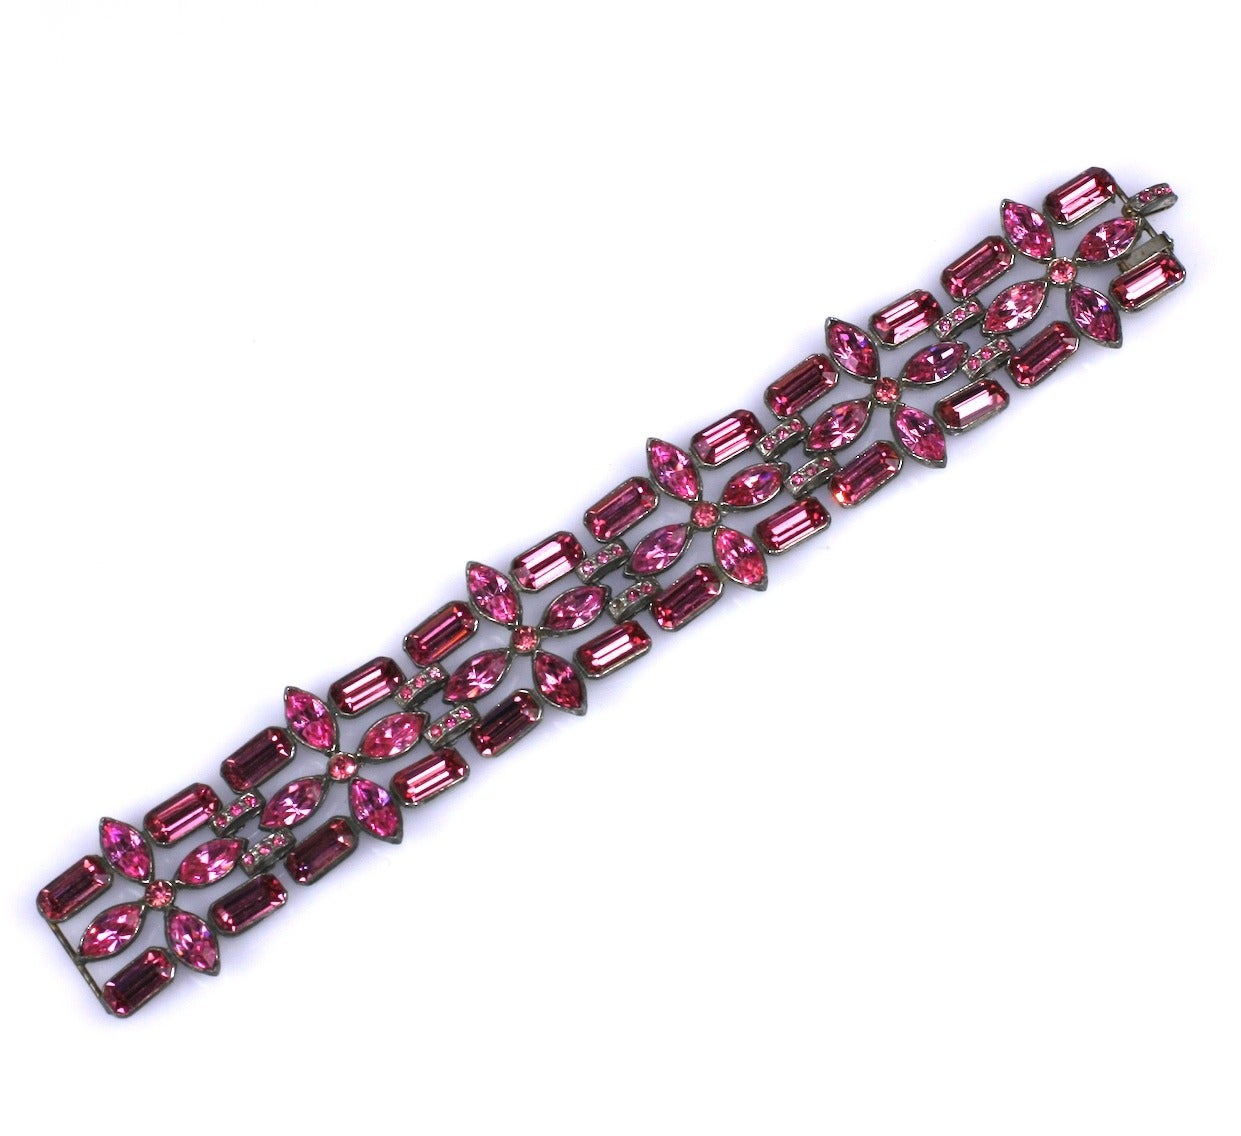 Eisenberg Fuschia Swarovski Crystal Bracelet made of marquise and baton shaped stones. Each stone is hand bezel set into their respective metal settings which make for an 